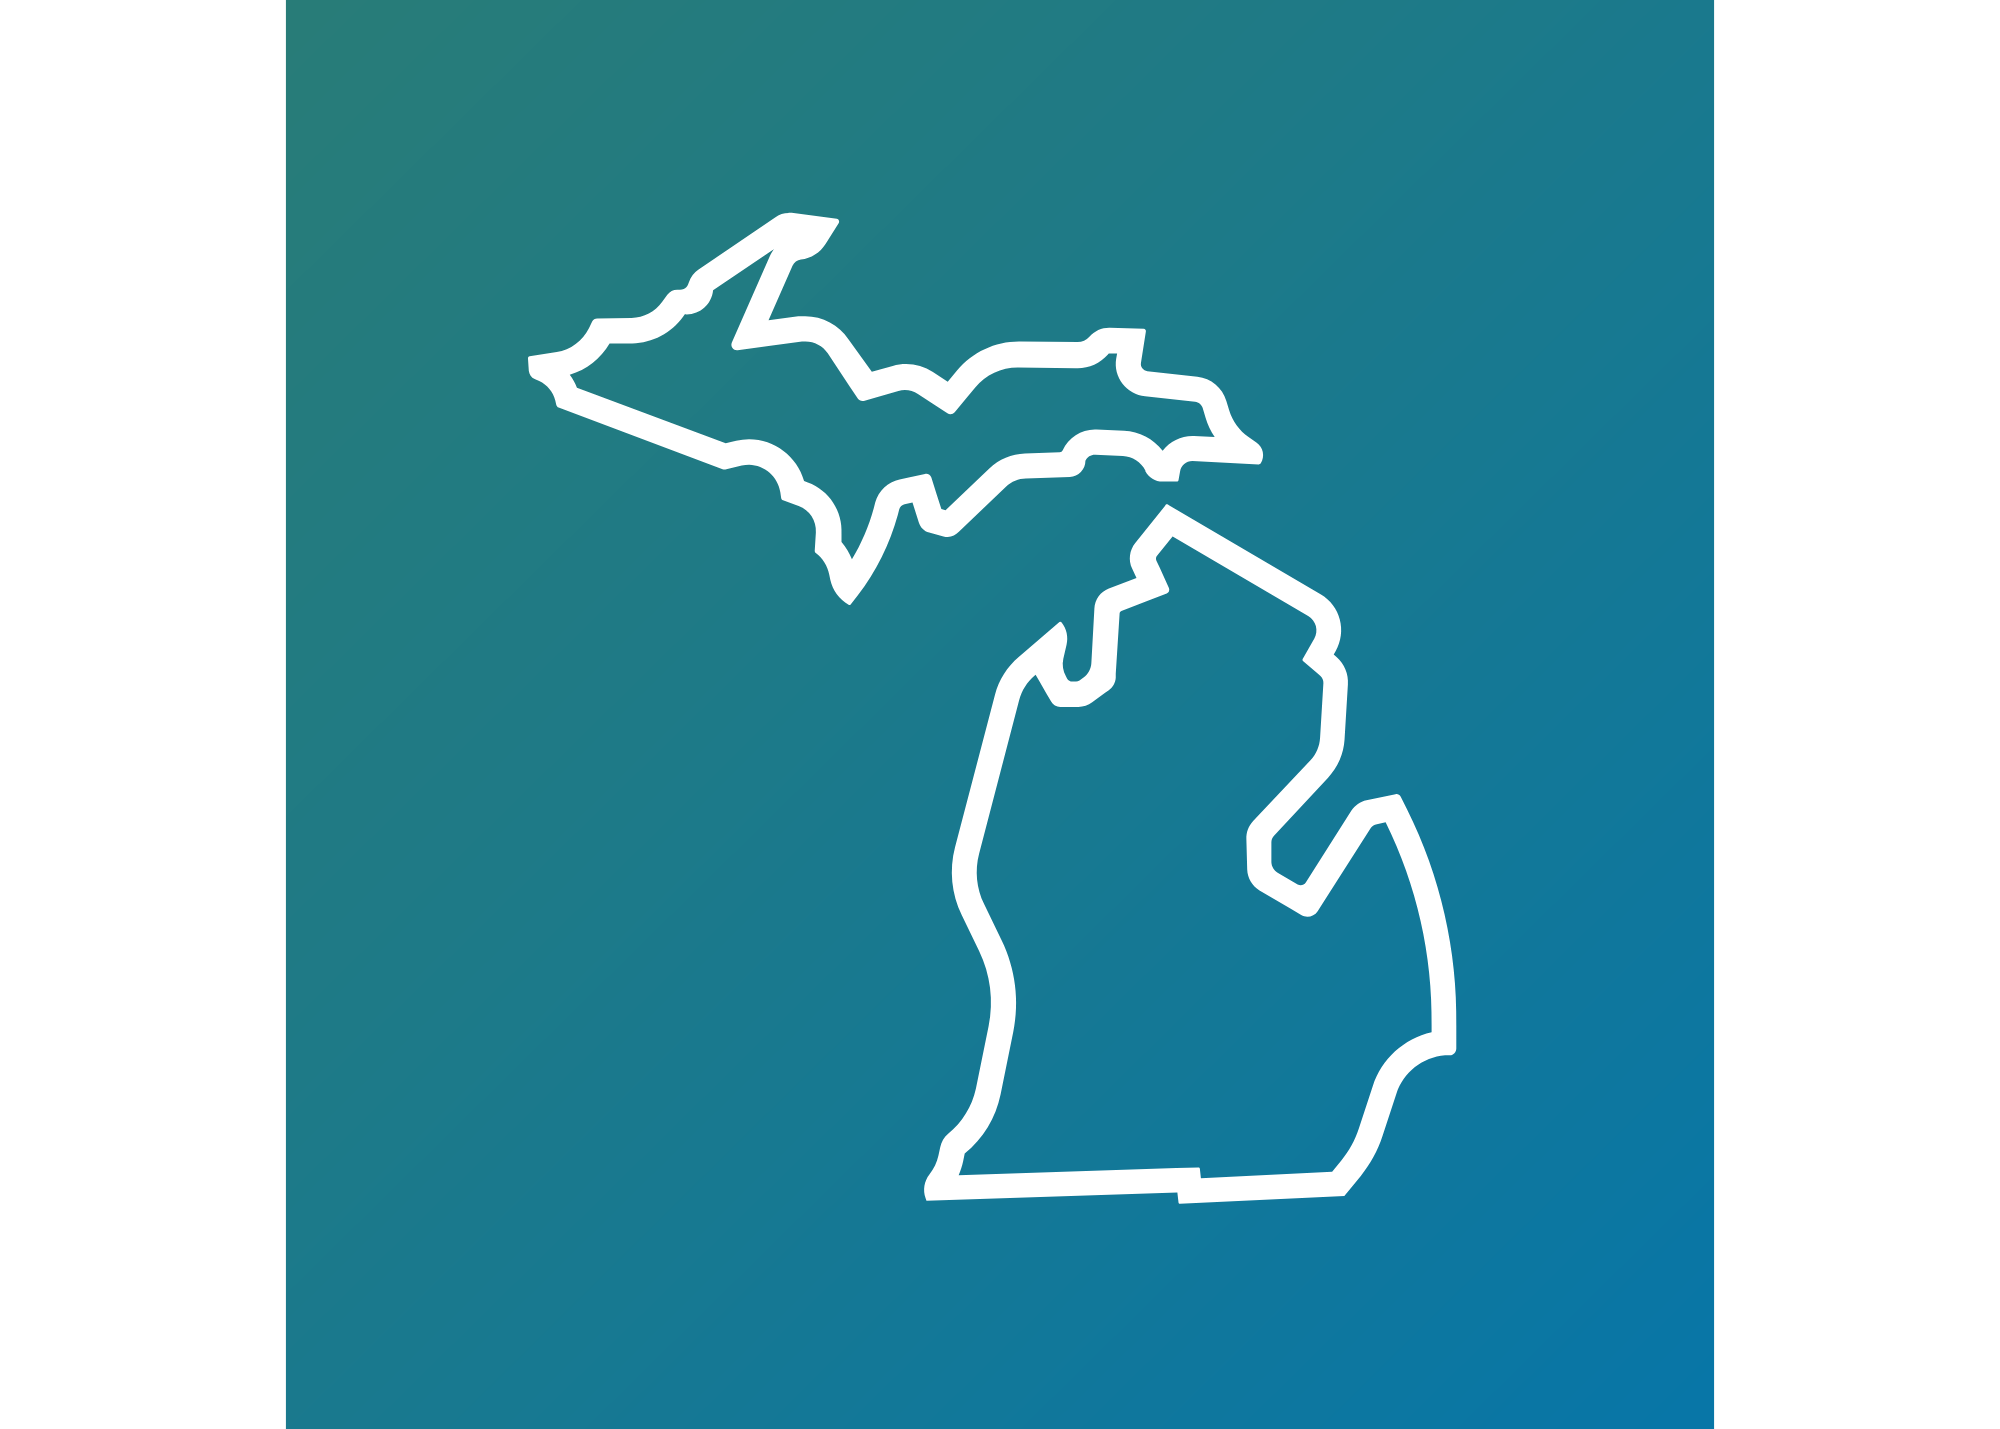 LEO | New Resource Hub To Benefit Michigan Communities Via $1M In Federal Grant Awarded To LEO And MML